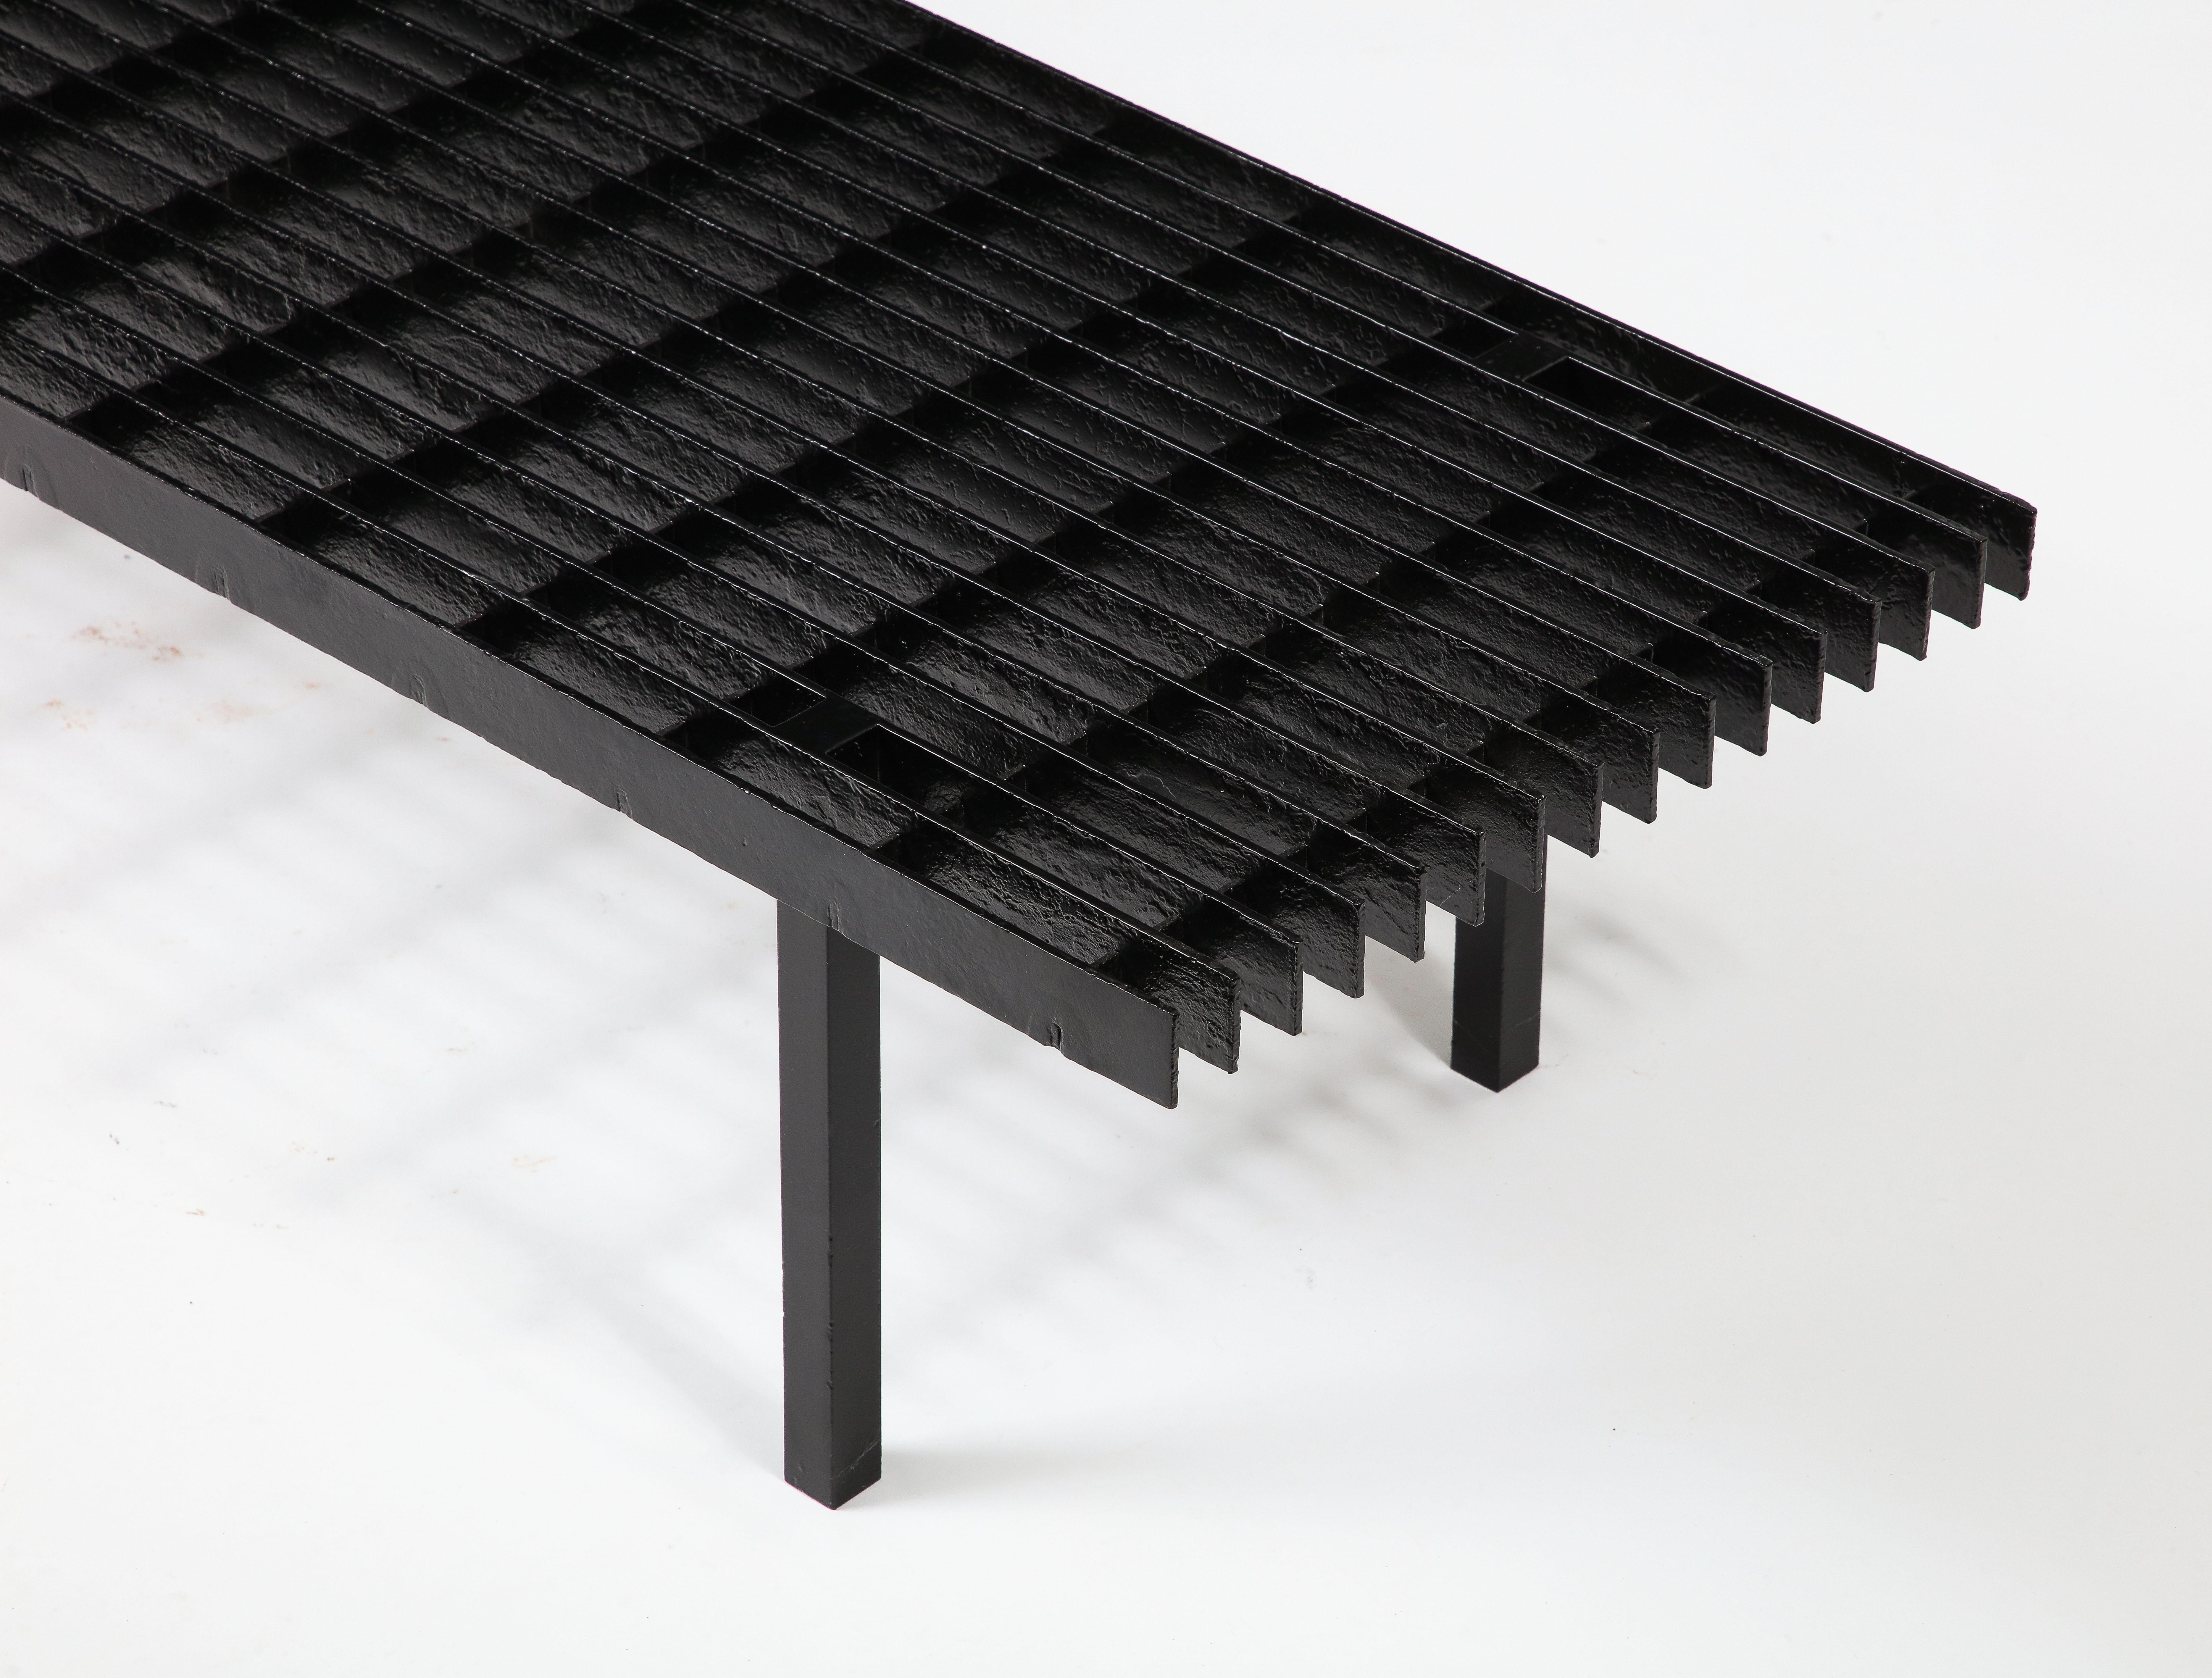 20th Century Black Enameled Steel Slat Bench or Low Coffee Table, USA 1970's For Sale